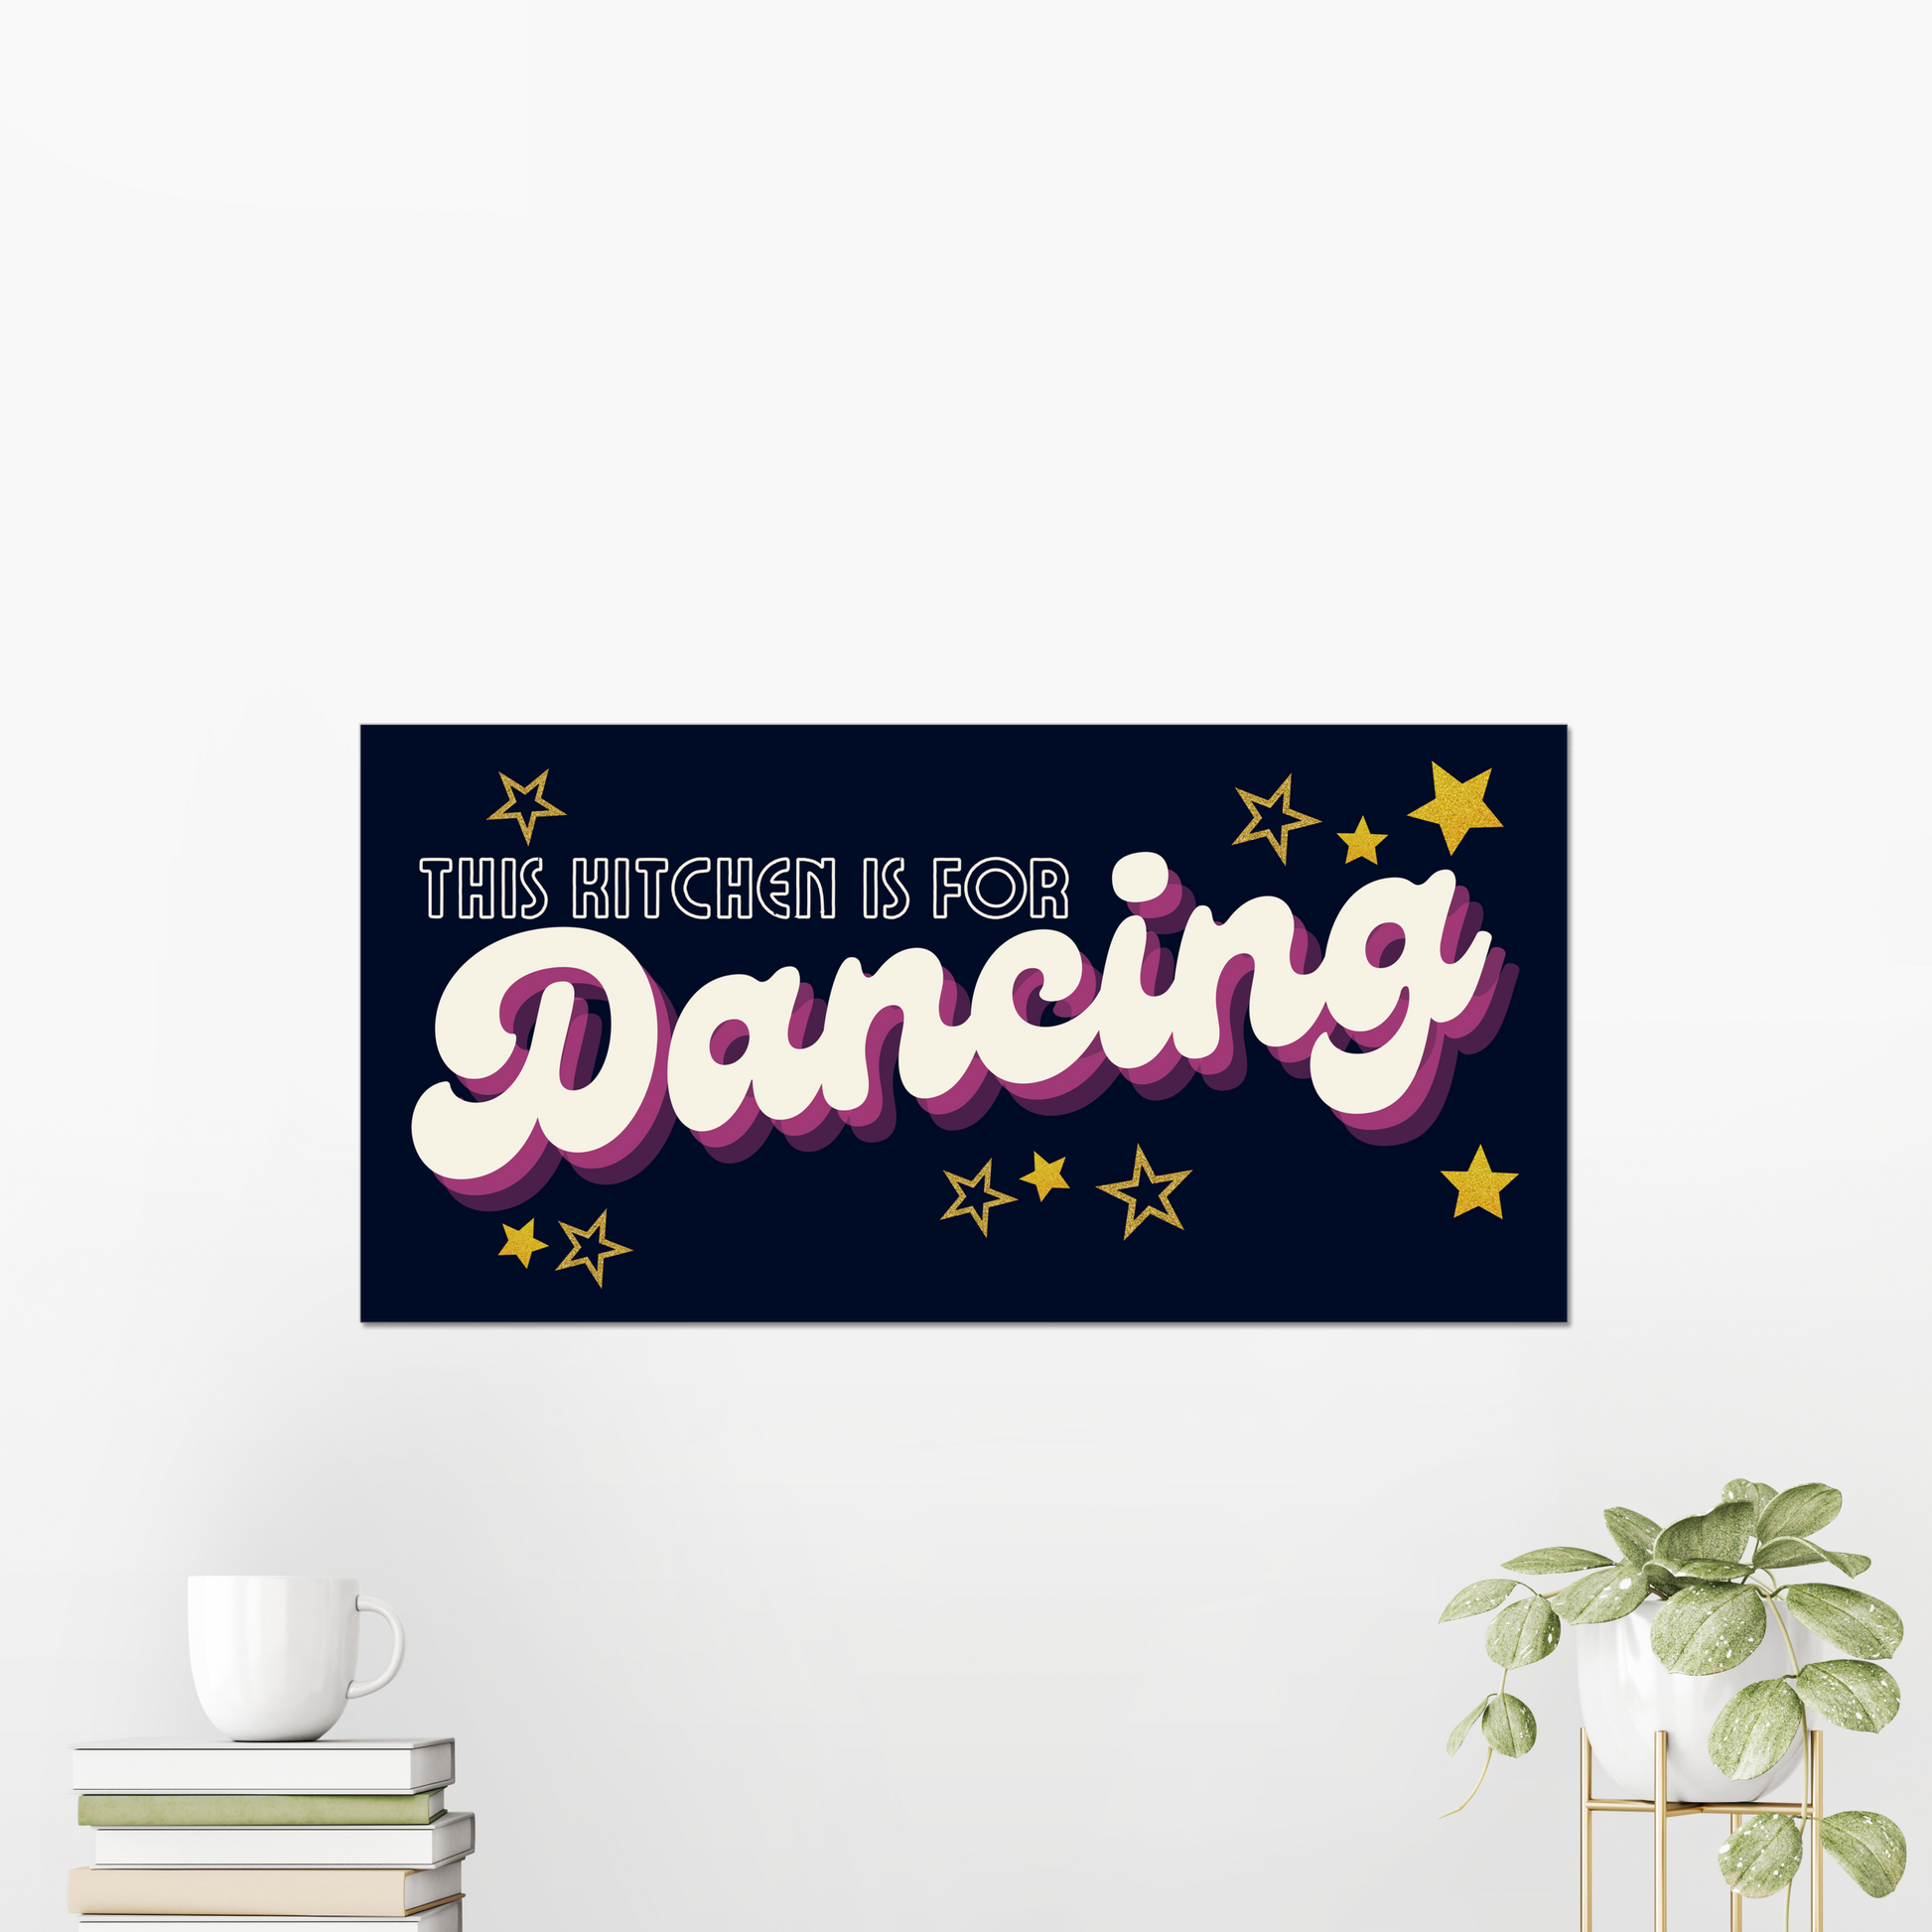 Looking for a unique and stylish kitchen update? Look no further than our 'This Kitchen Is For Dancing' art print! Our prints feature retro vibes with a navy, gold and sparkly style stars. They're perfect as a gift for someone special - or for treating yourself!